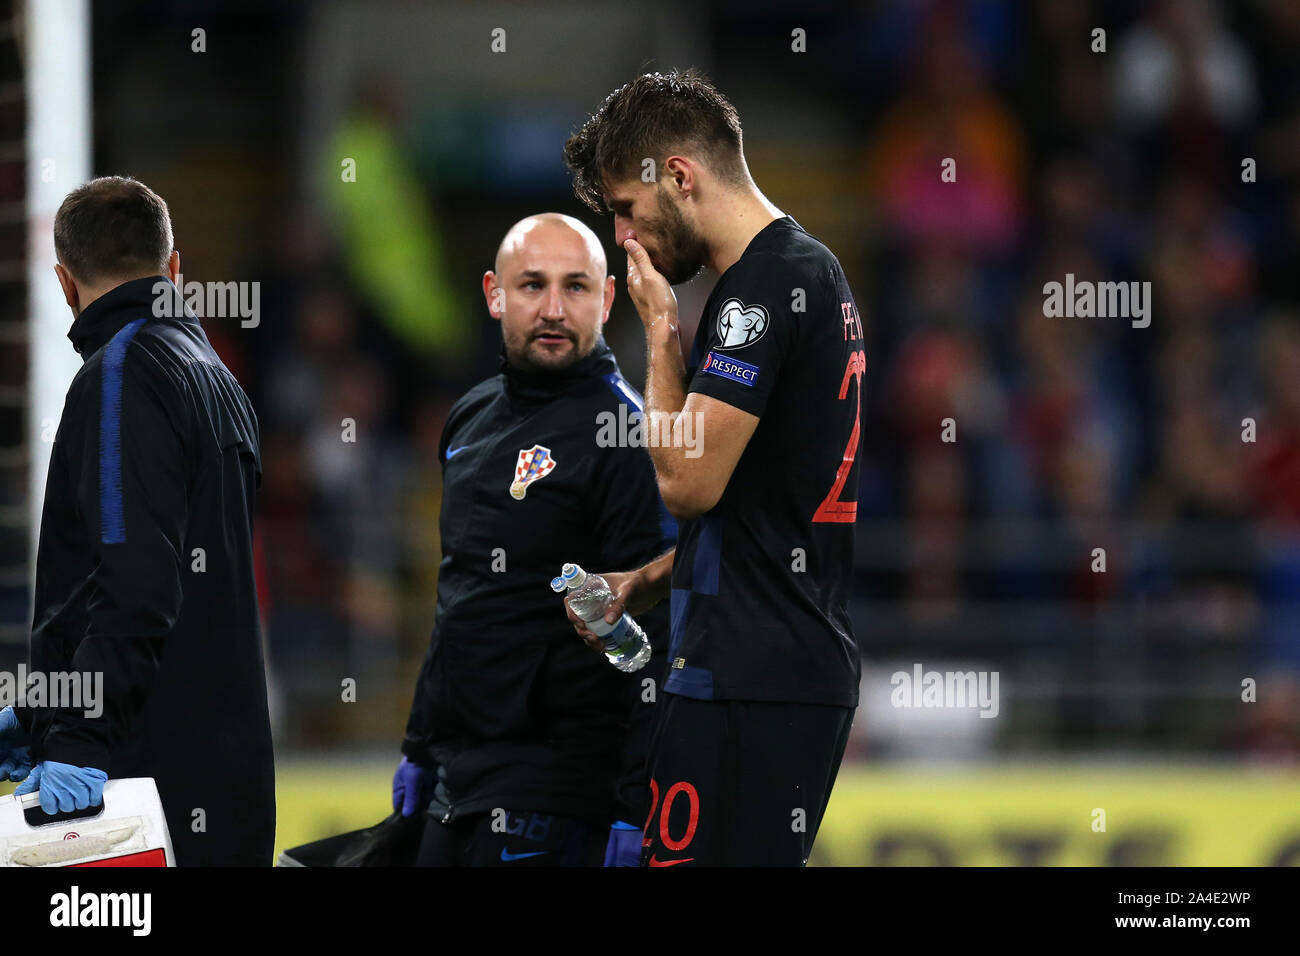 Cardiff, UK. 13th Oct, 2019. Bruno Petkovic of Croatia is treated for an injury.UEFA Euro 2020 qualifier match, Wales v Croatia at the Cardiff city Stadium in Cardiff, South Wales on Sunday 13th October 2019. pic by Andrew Orchard /Andrew Orchard sports photography/Alamy live News EDITORIAL USE ONLY Credit: Andrew Orchard sports photography/Alamy Live News Stock Photo